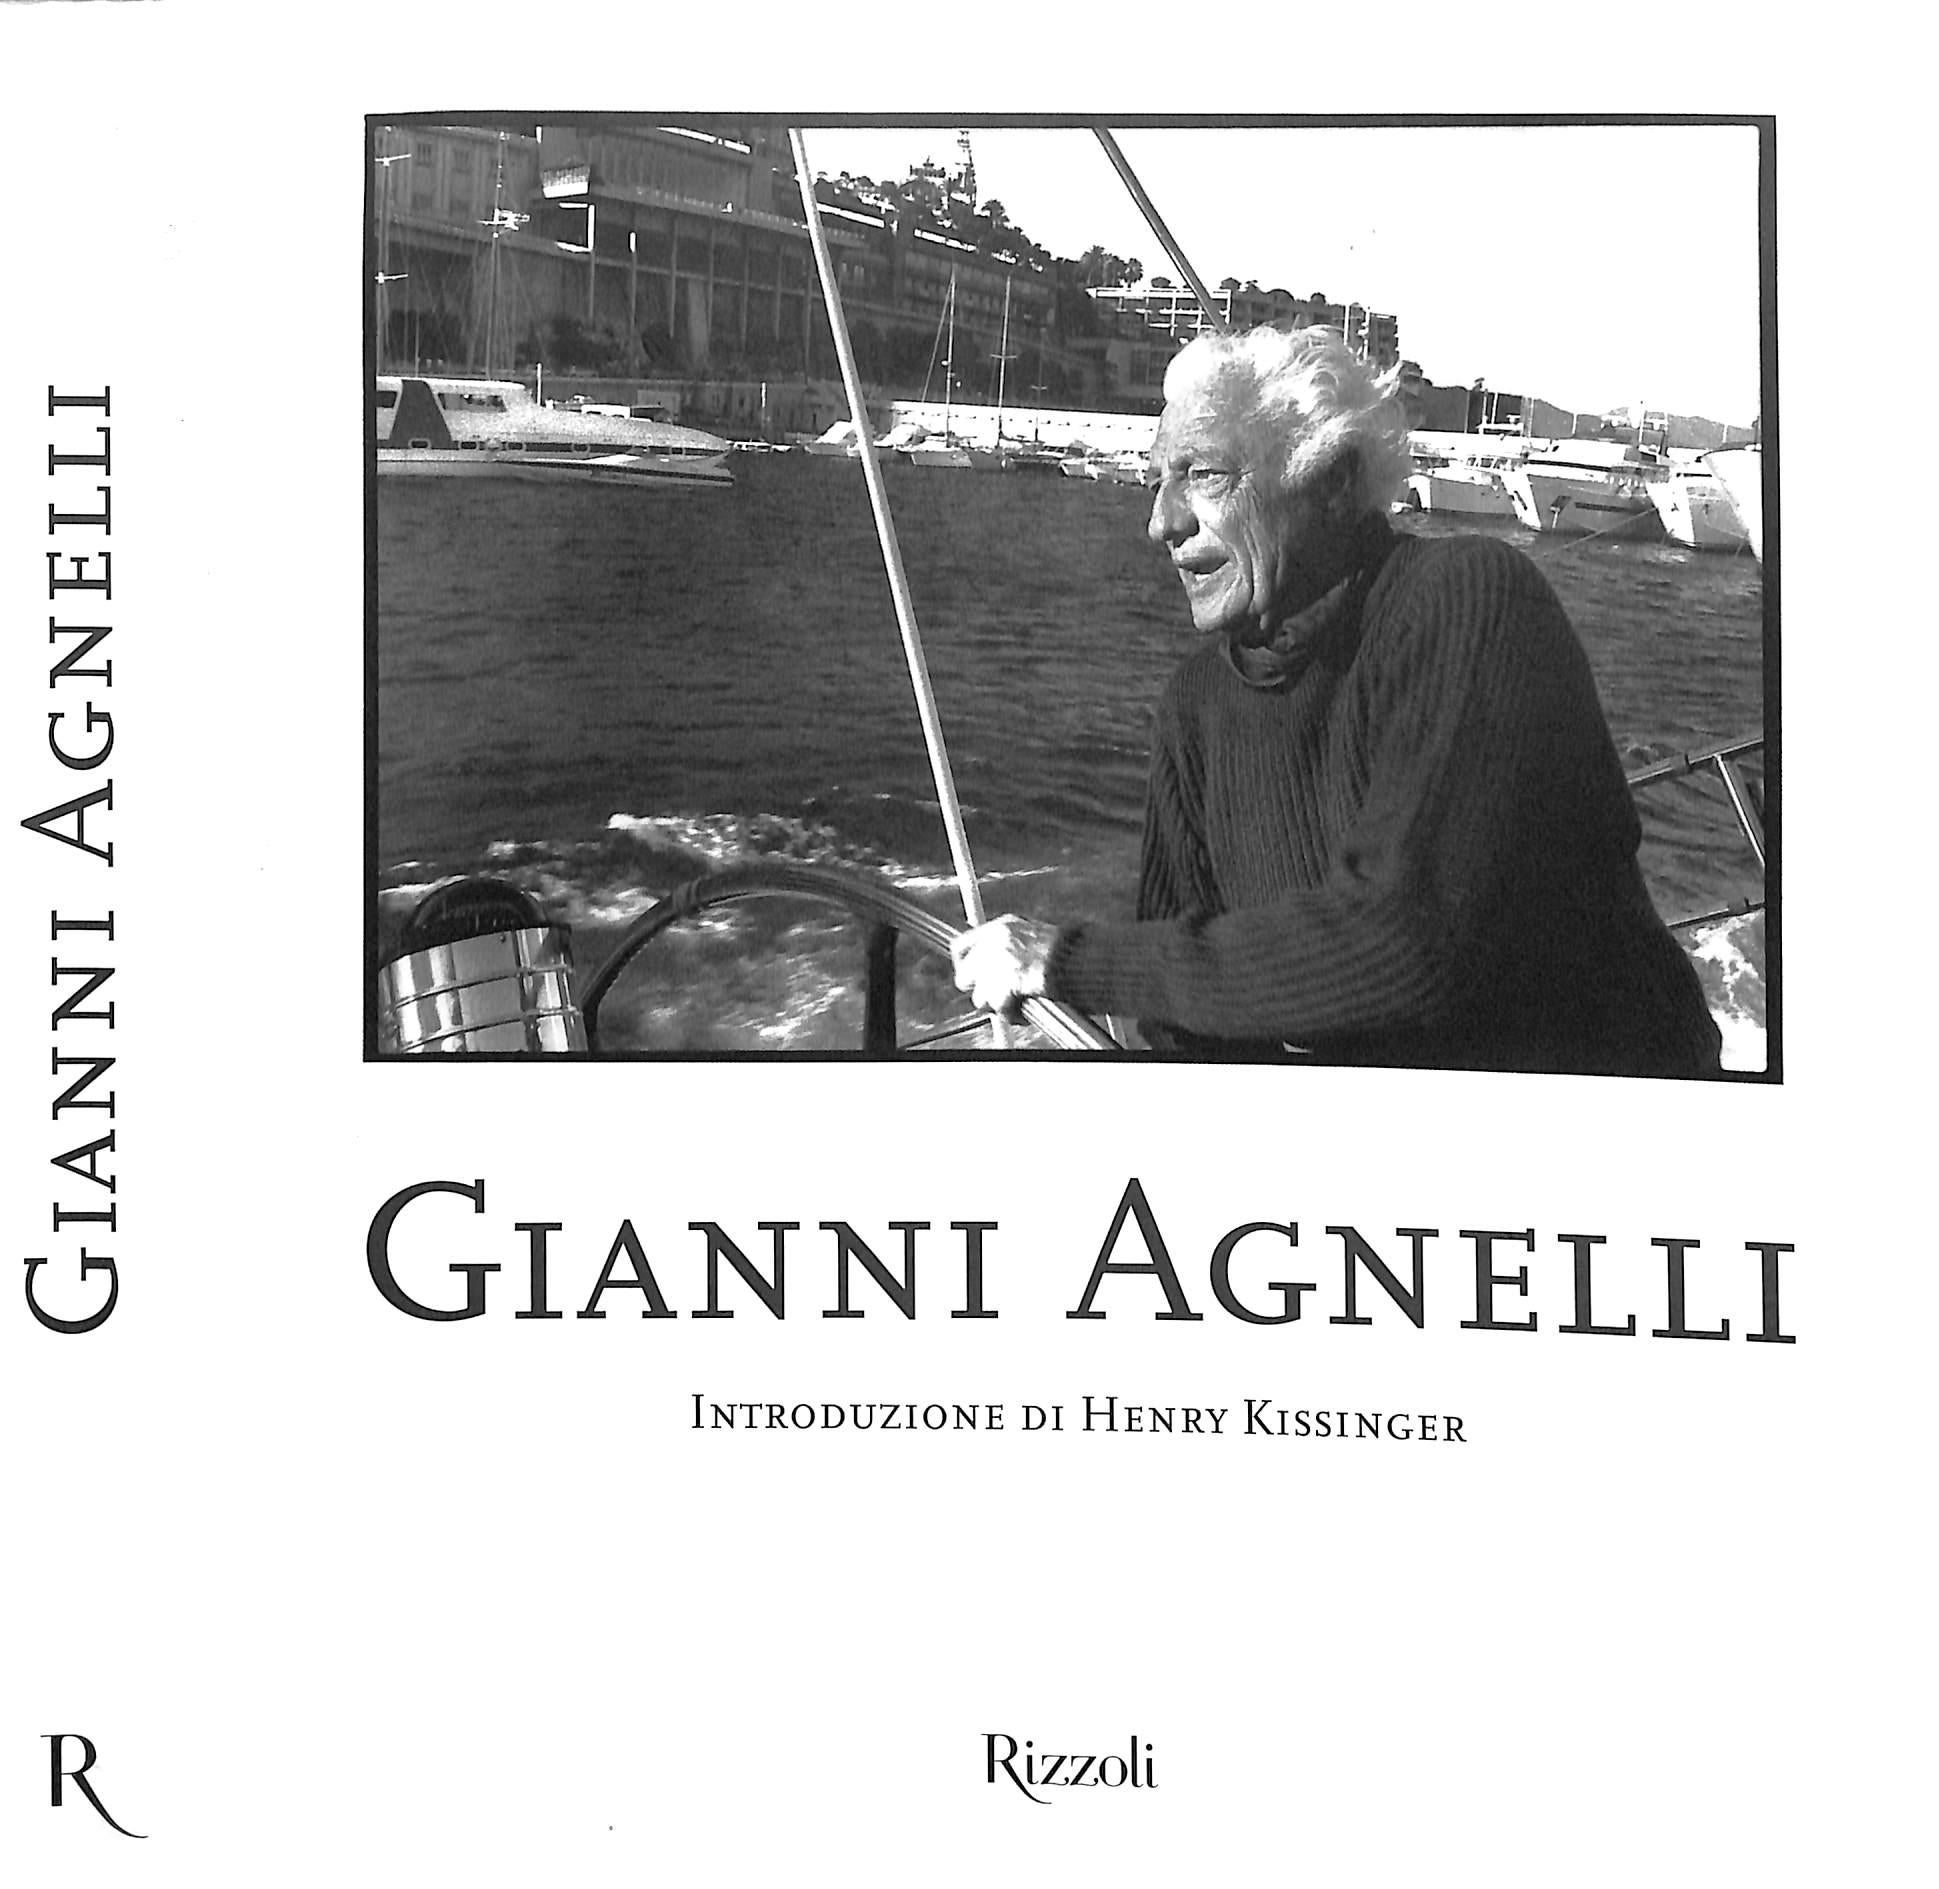 "Gianni Agnelli" 2007 - Art by Unknown